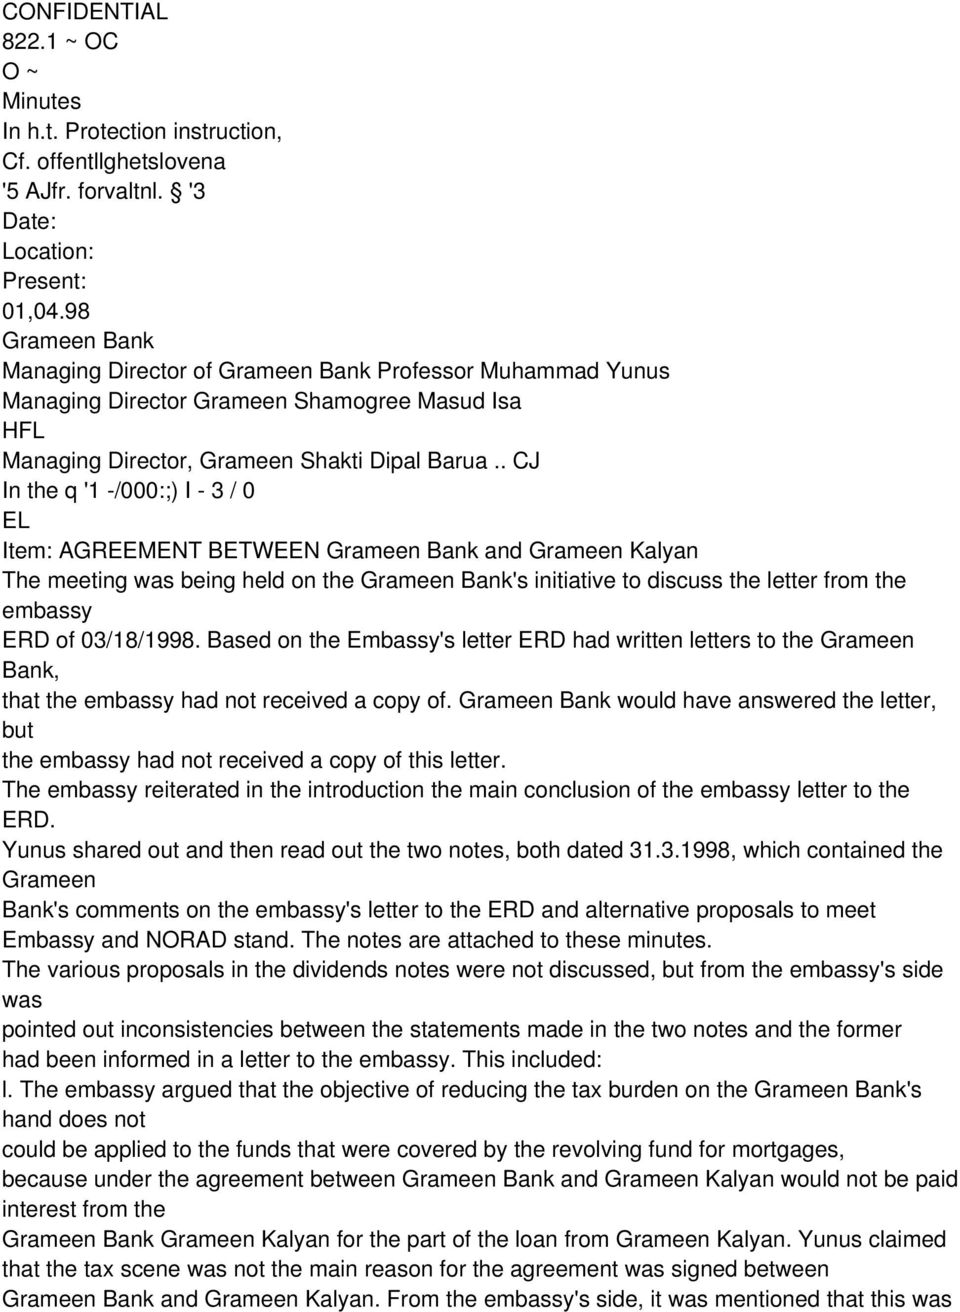 . CJ In the q '1 -/000:;) I - 3 / 0 EL Item: AGREEMENT BETWEEN Grameen Bank and Grameen Kalyan The meeting was being held on the Grameen Bank's initiative to discuss the letter from the embassy ERD